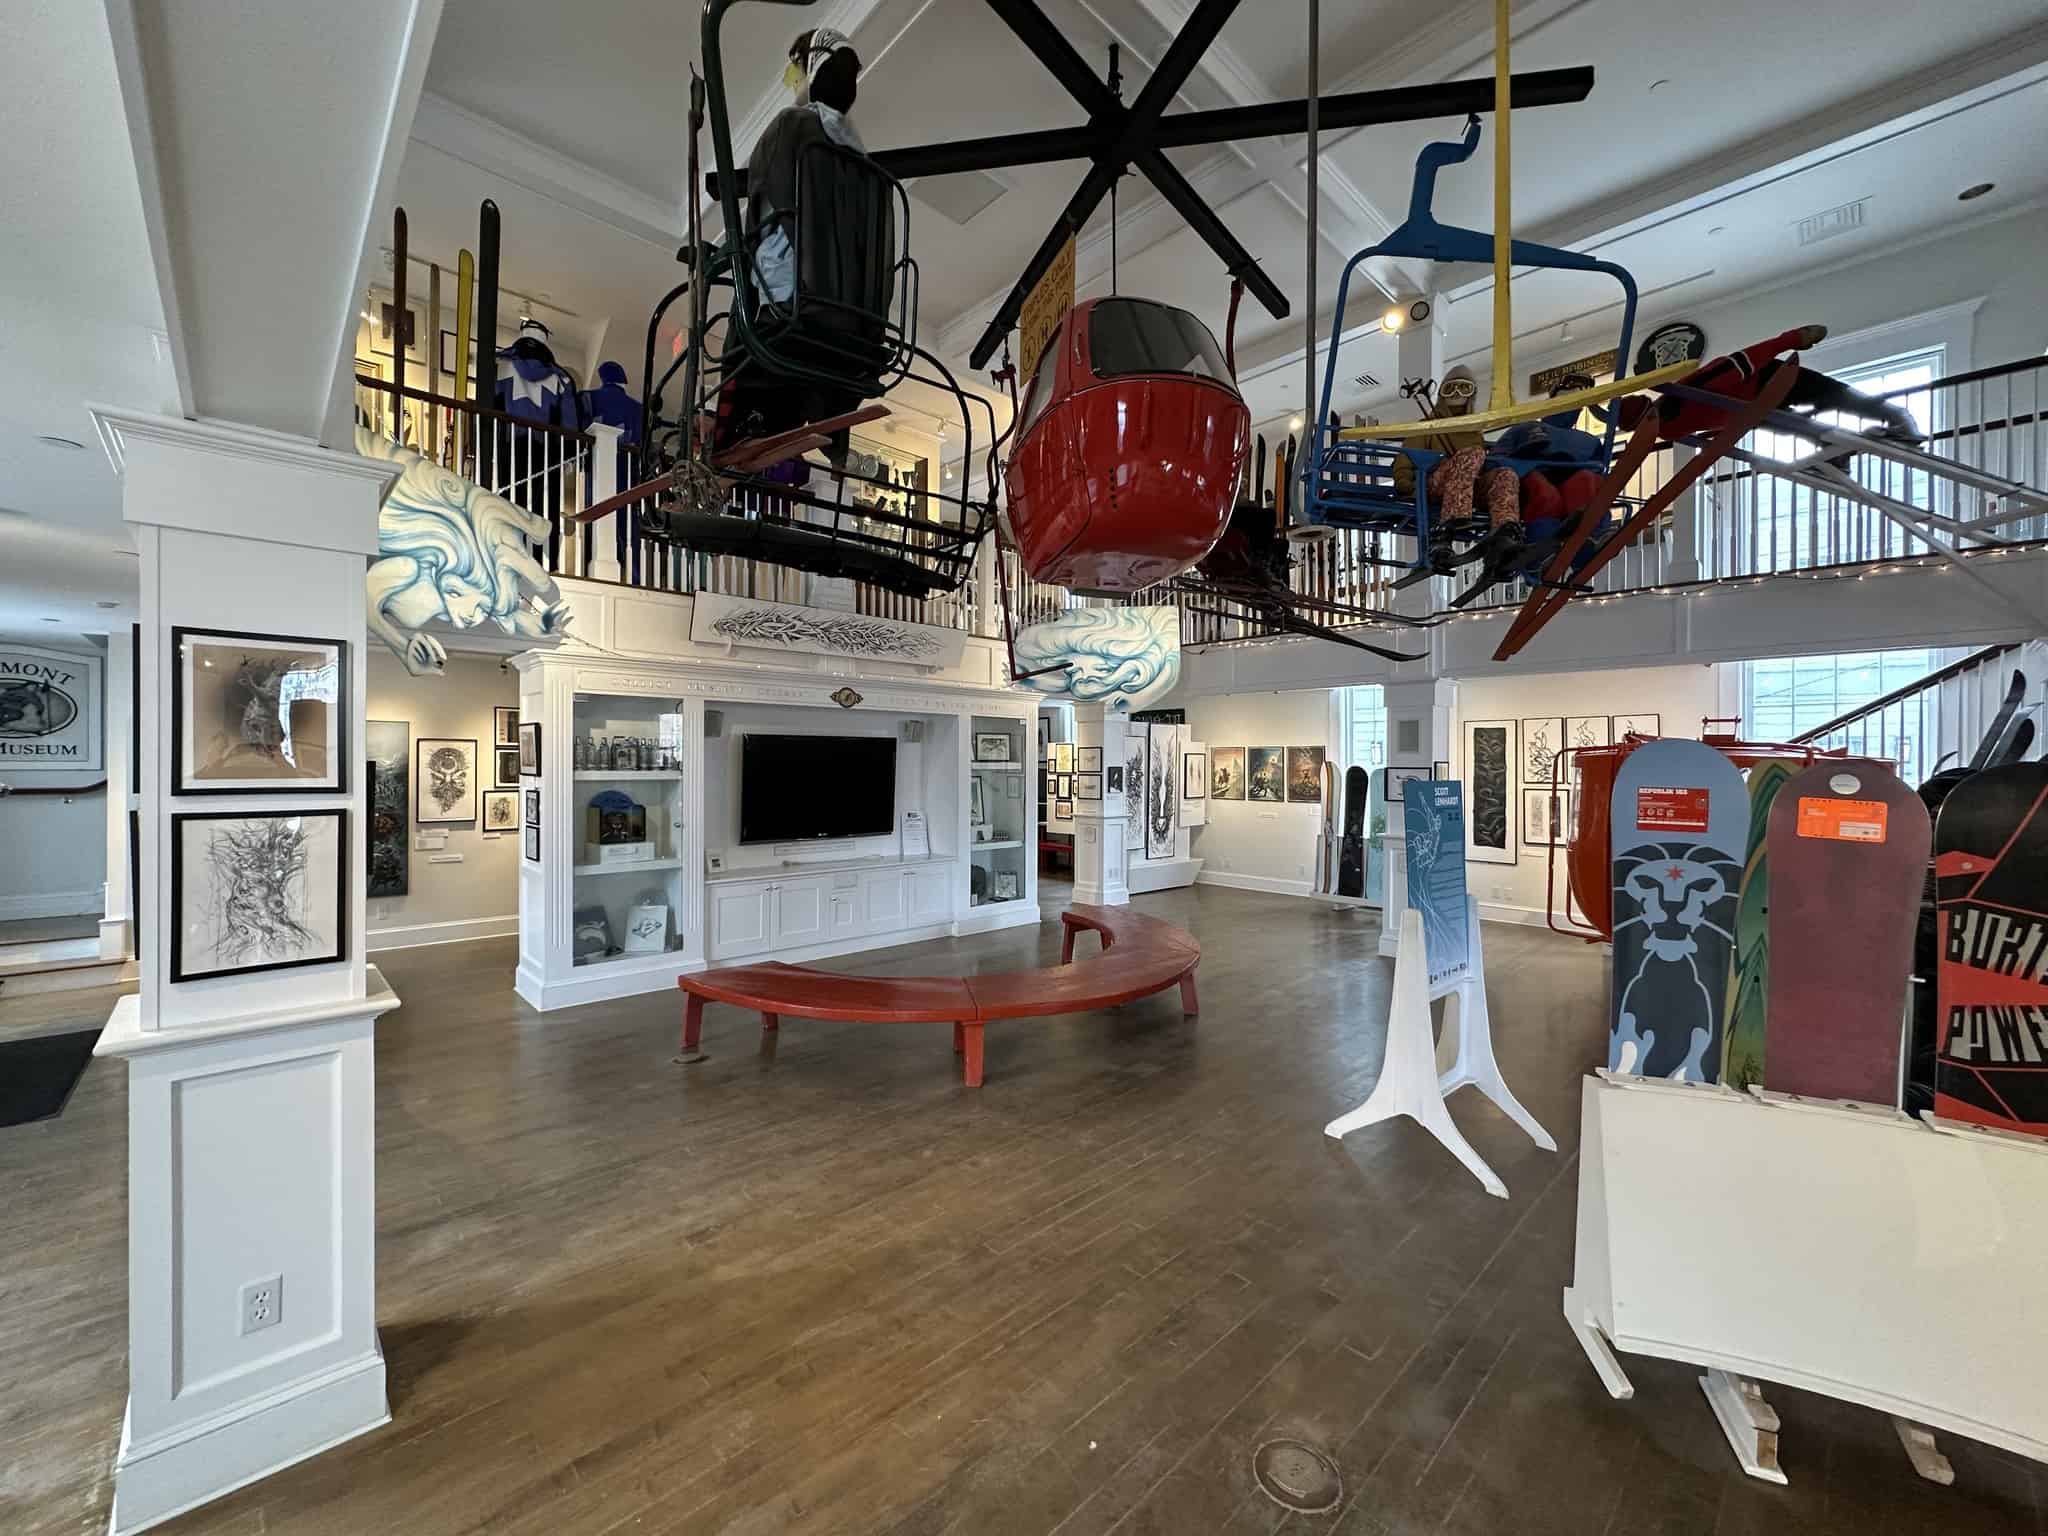 Vermont Ski Museum - Main Floor with Lifts on Ceiling